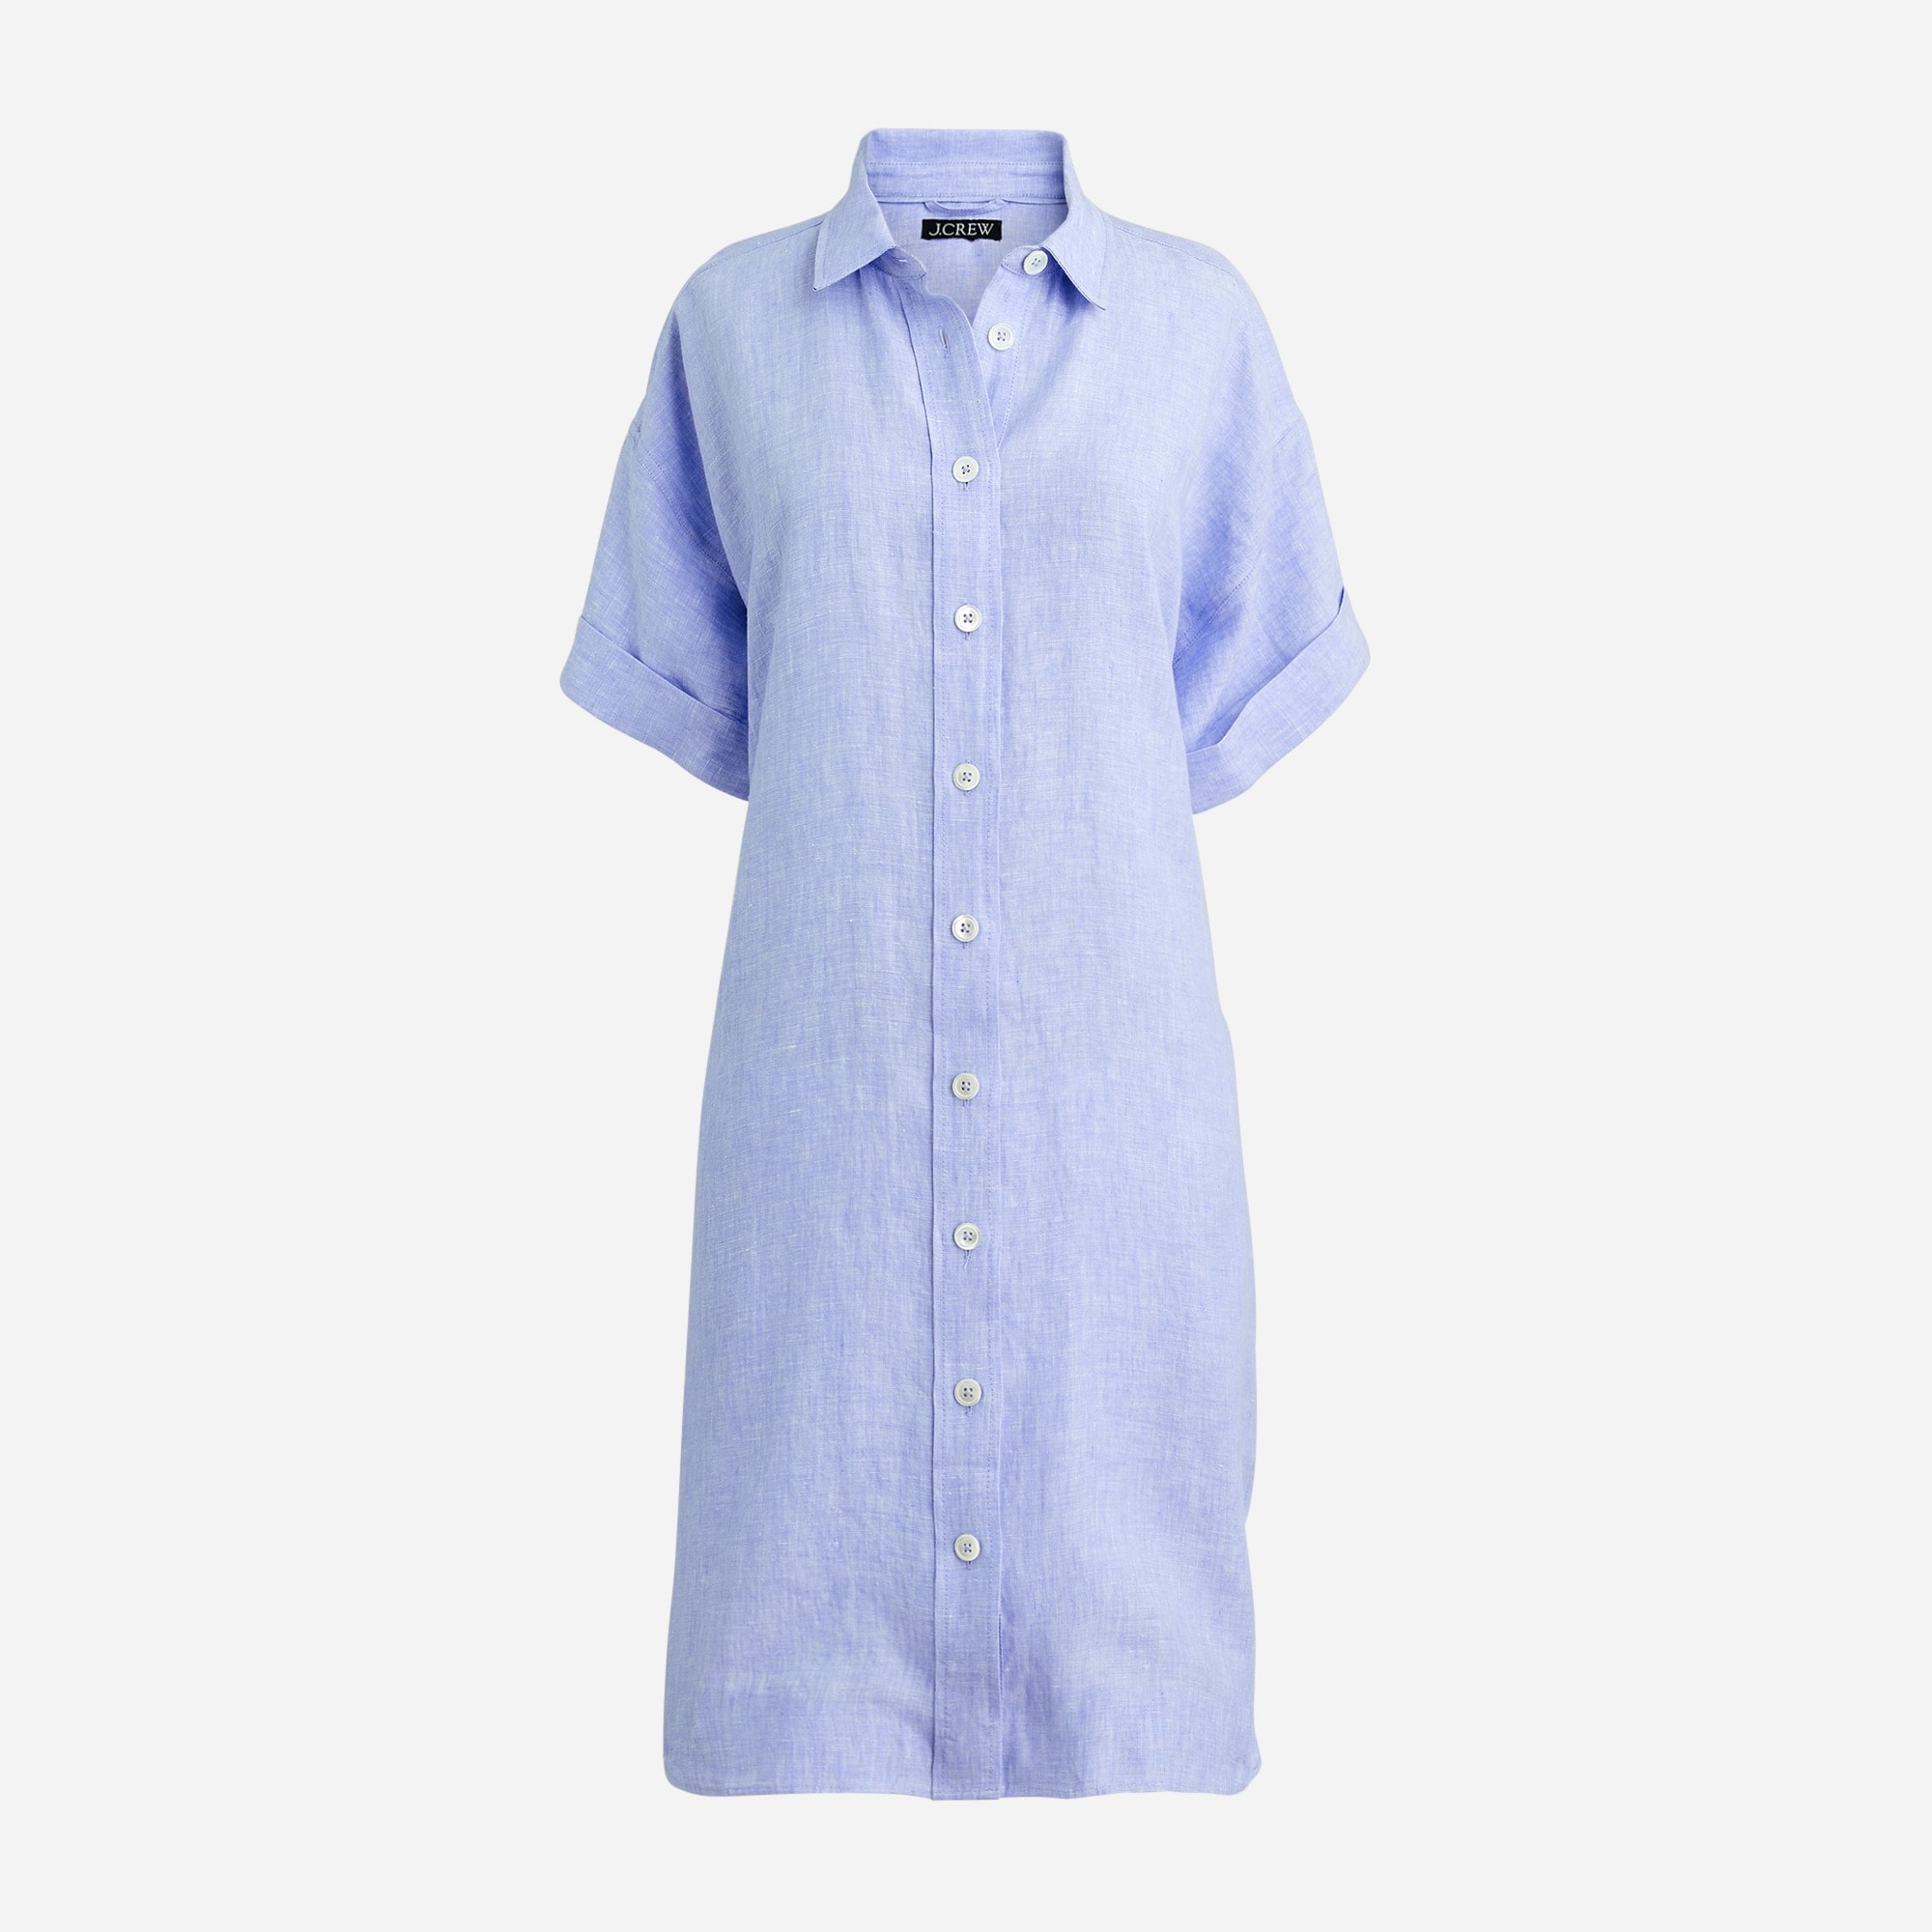  Capitaine shirtdress in linen